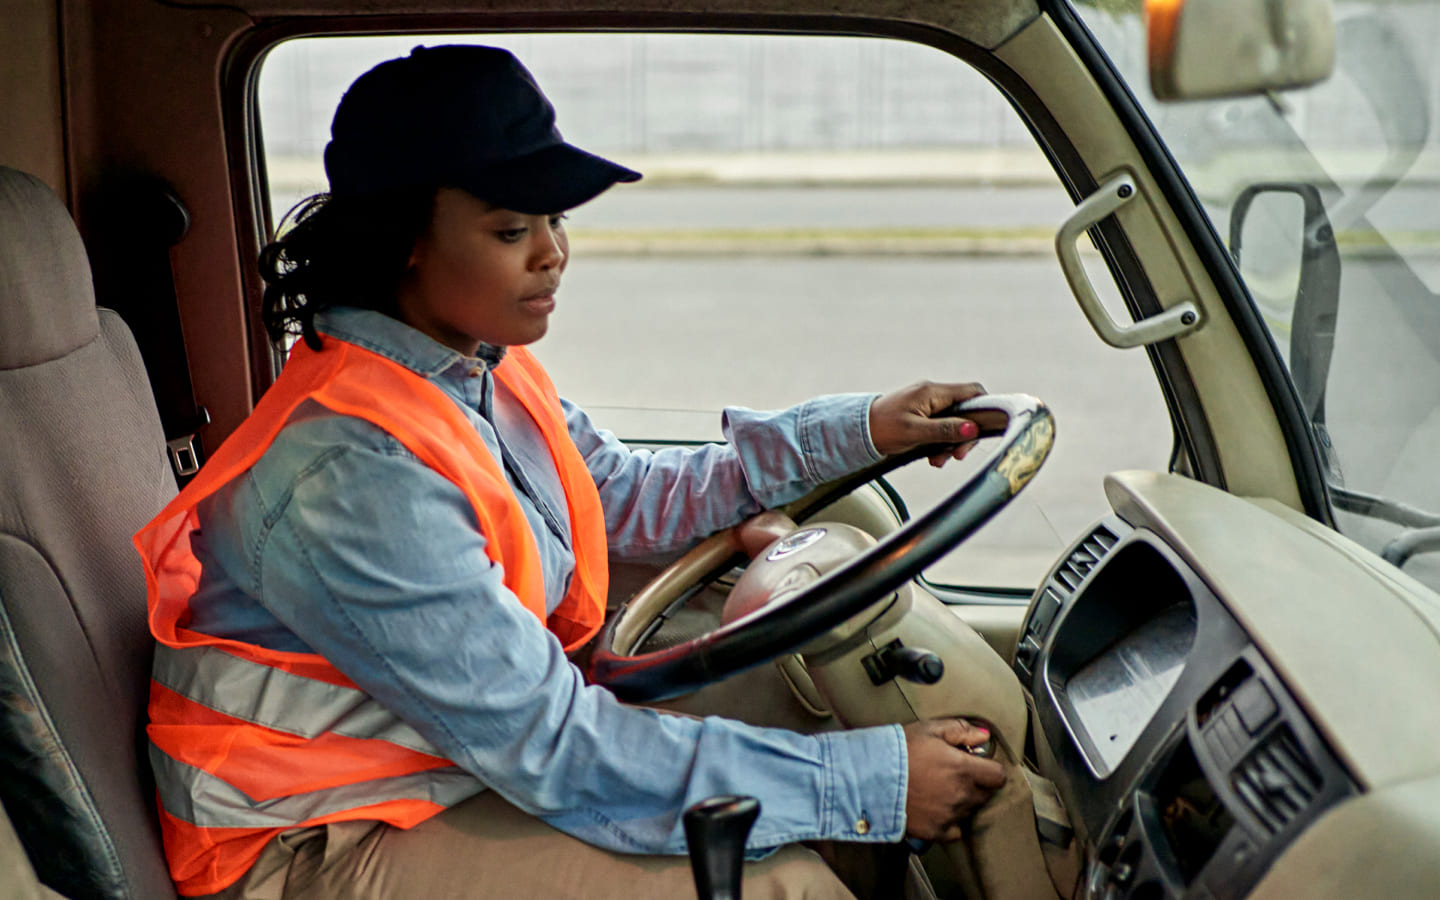 https://gomotive.com/wp-content/uploads/2022/09/2022Q3_913020041_Blog-Image_How-to-Support-Women-in-Trucking_Feature_MS.jpg.jpg